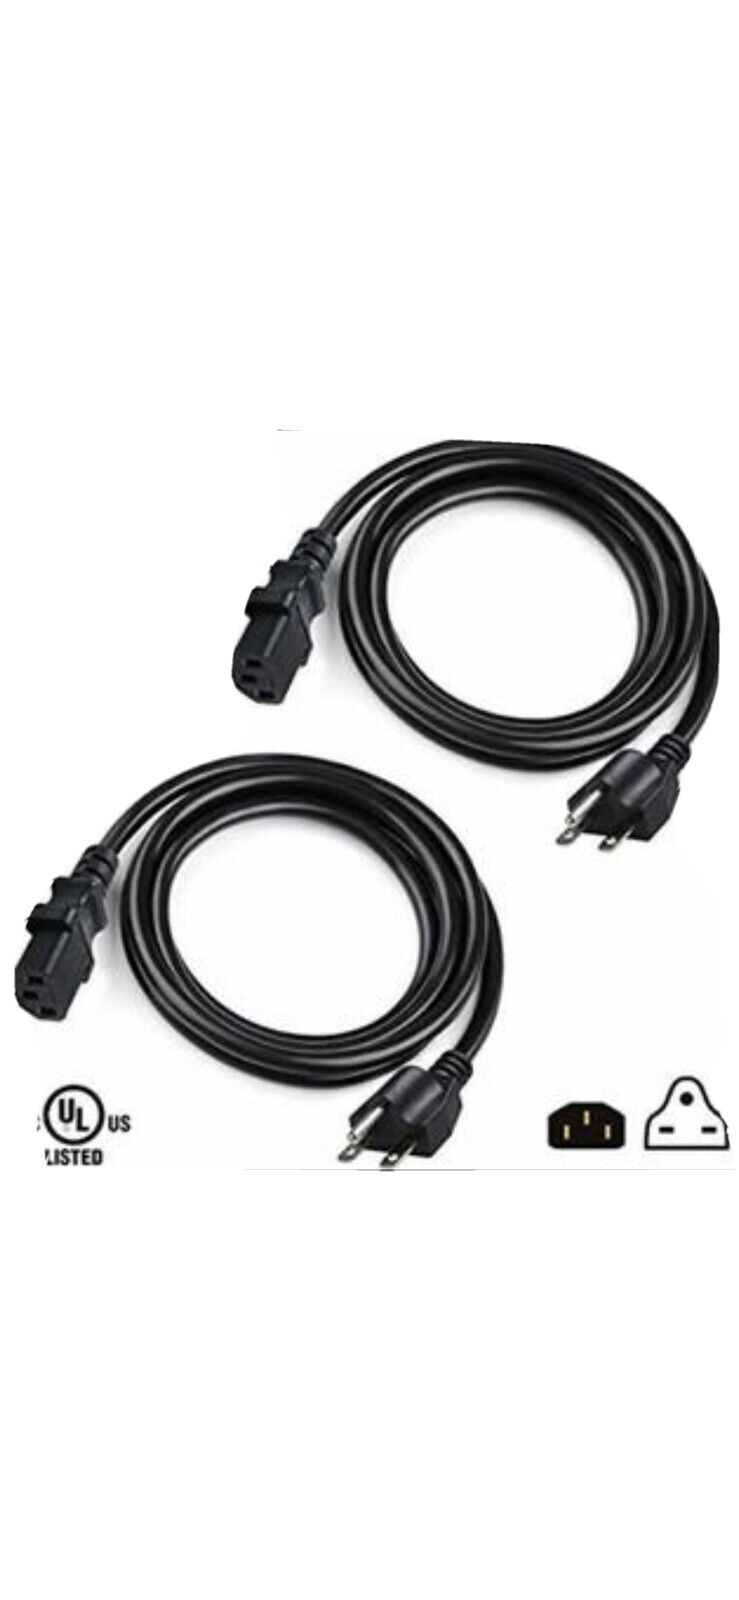 Lot 2 - 7FT Each Extension Cord Ballast Reflector Power Grow Light Lamp Cable 